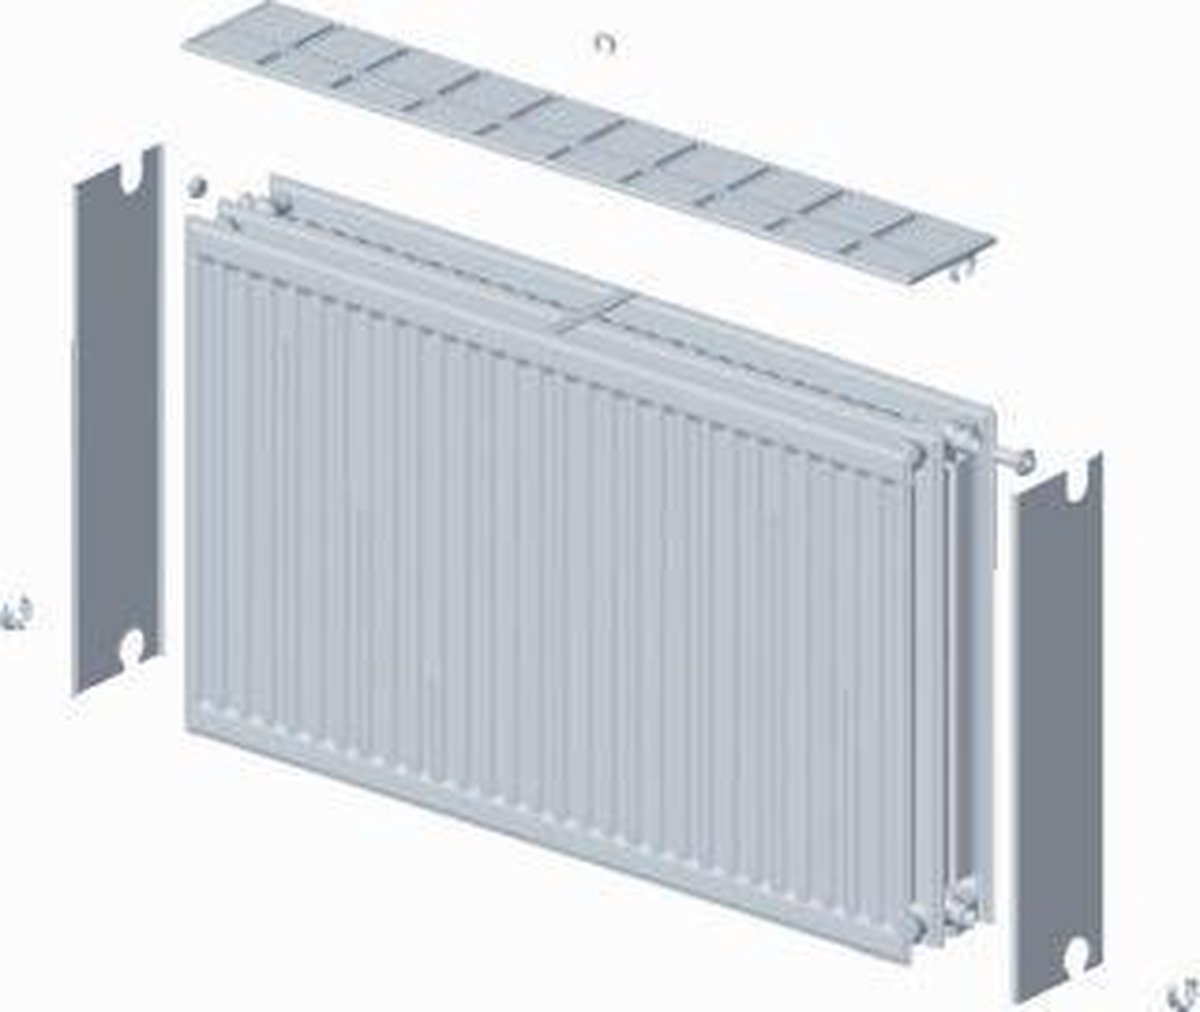 Stelrad paneelradiator Novello, staal, wit, (hxlxd) 500x1800x158mm, 33